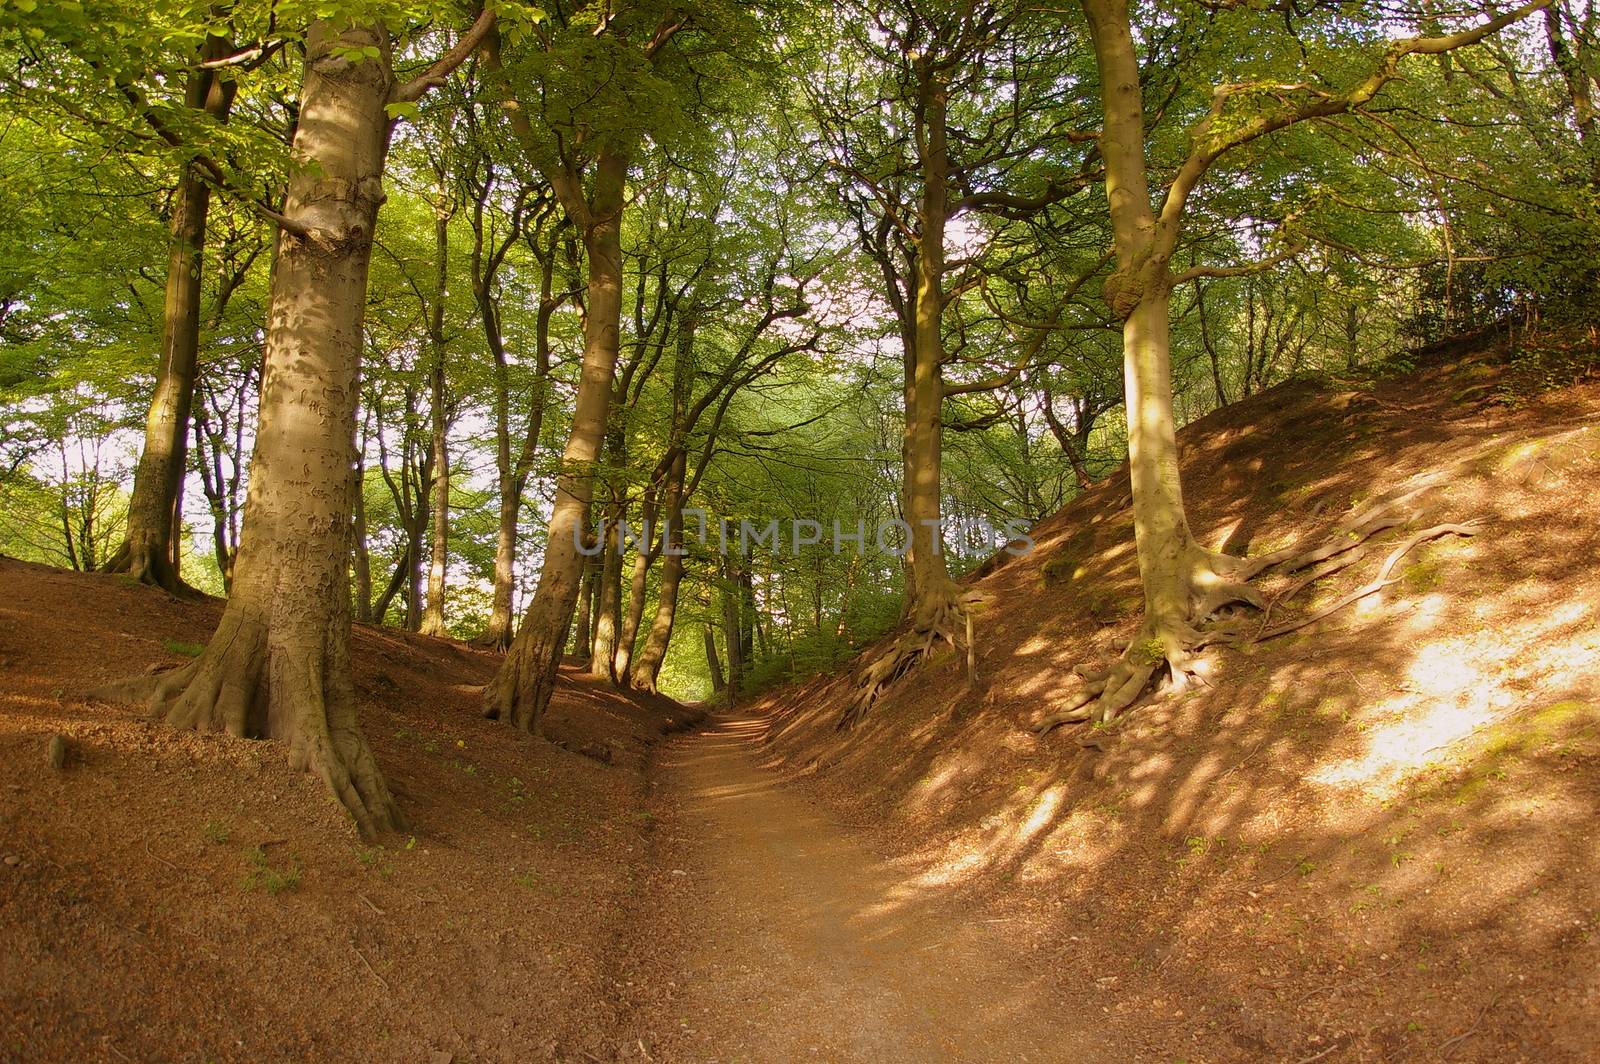 A woodland path through Prestwich Clough, Greater Manchester, UK, with tall trees in the height of summer